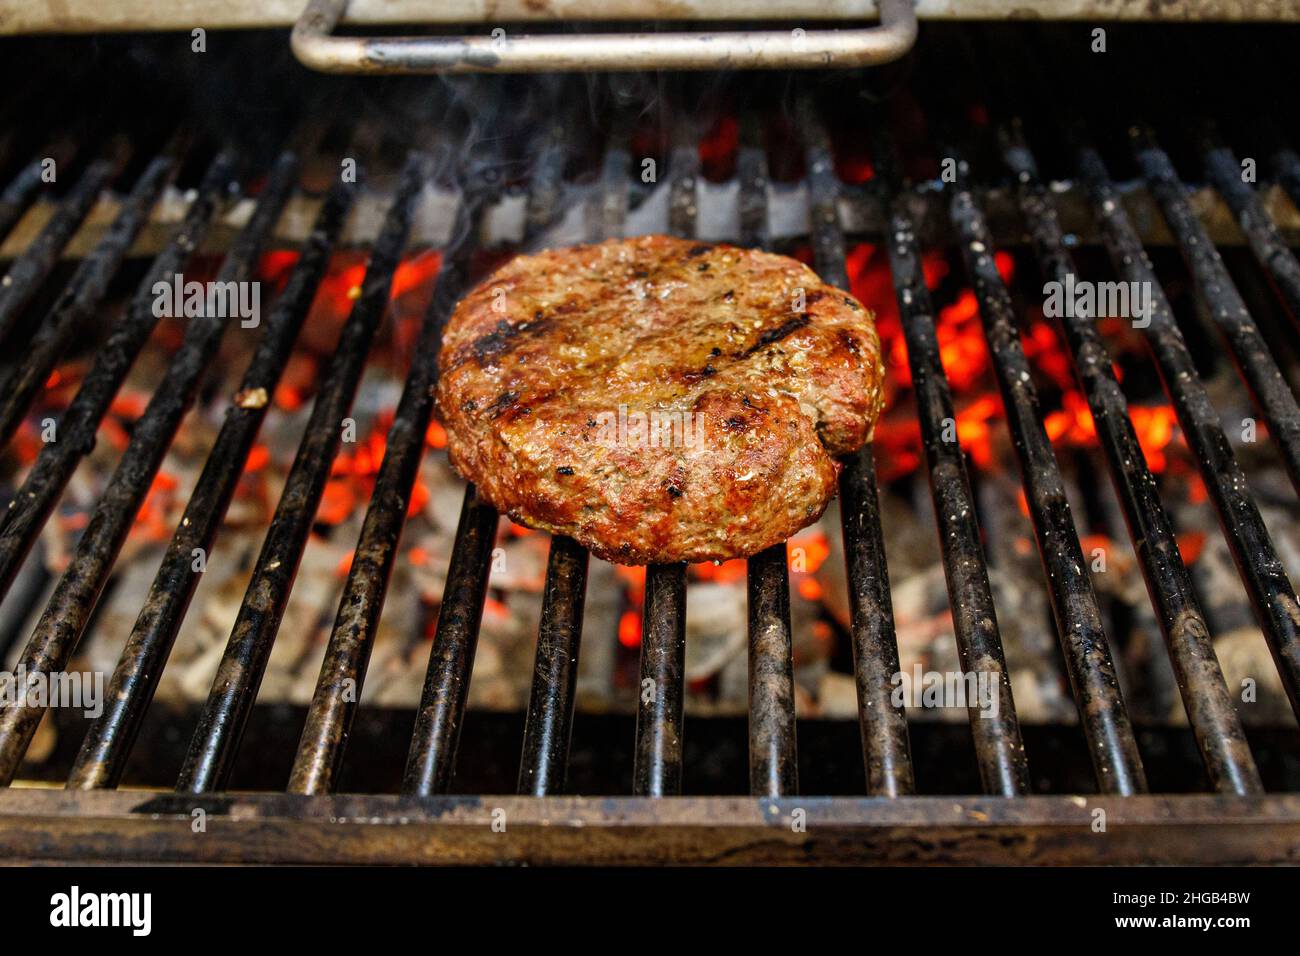 Premium Photo  Grilled burger on grill with flame fast food meal with meat  and vegetable cooking on grill delicios